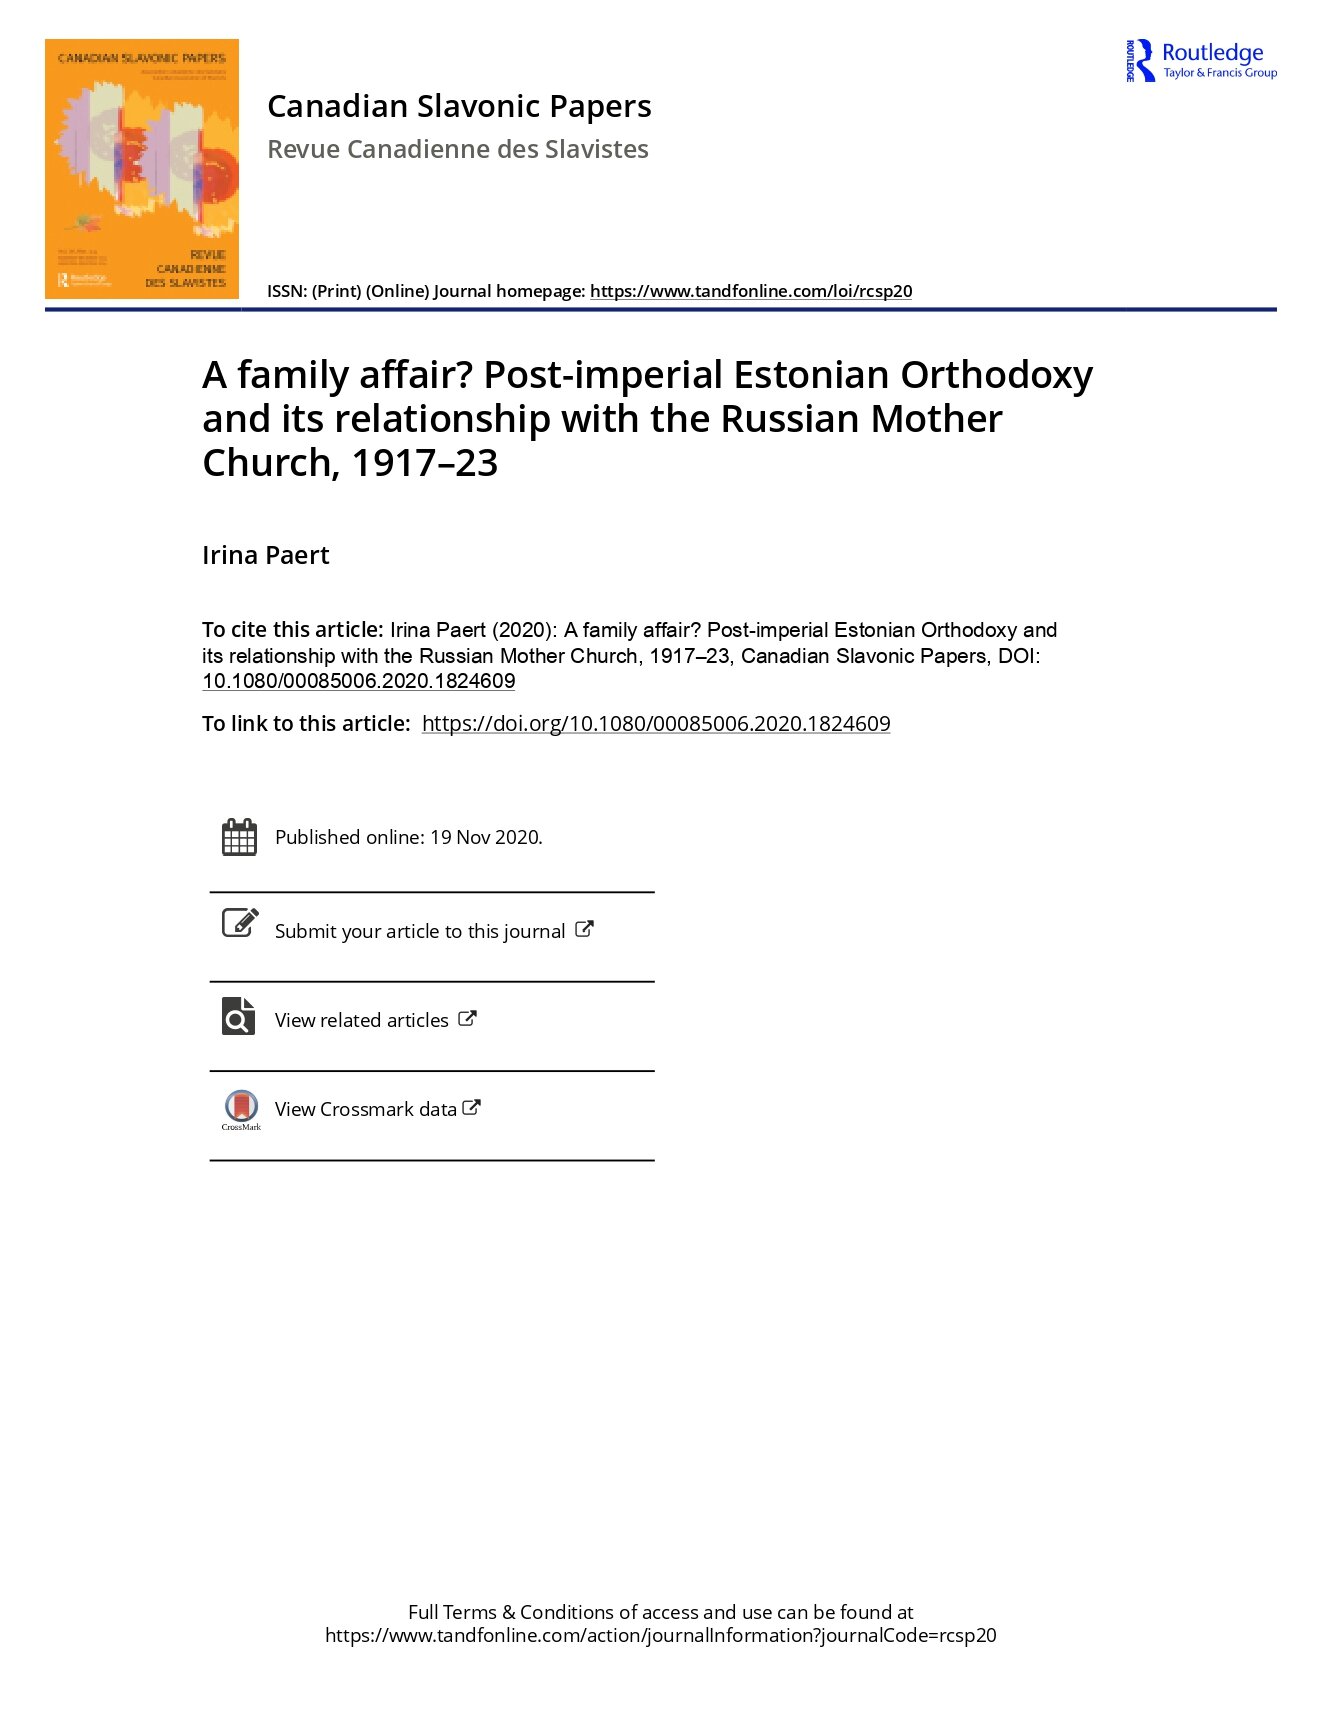 A family affair Post imperial Estonian Orthodoxy and its relationship with the Russian Mother Church 1917 23_pages-to-jpg-0001.jpg